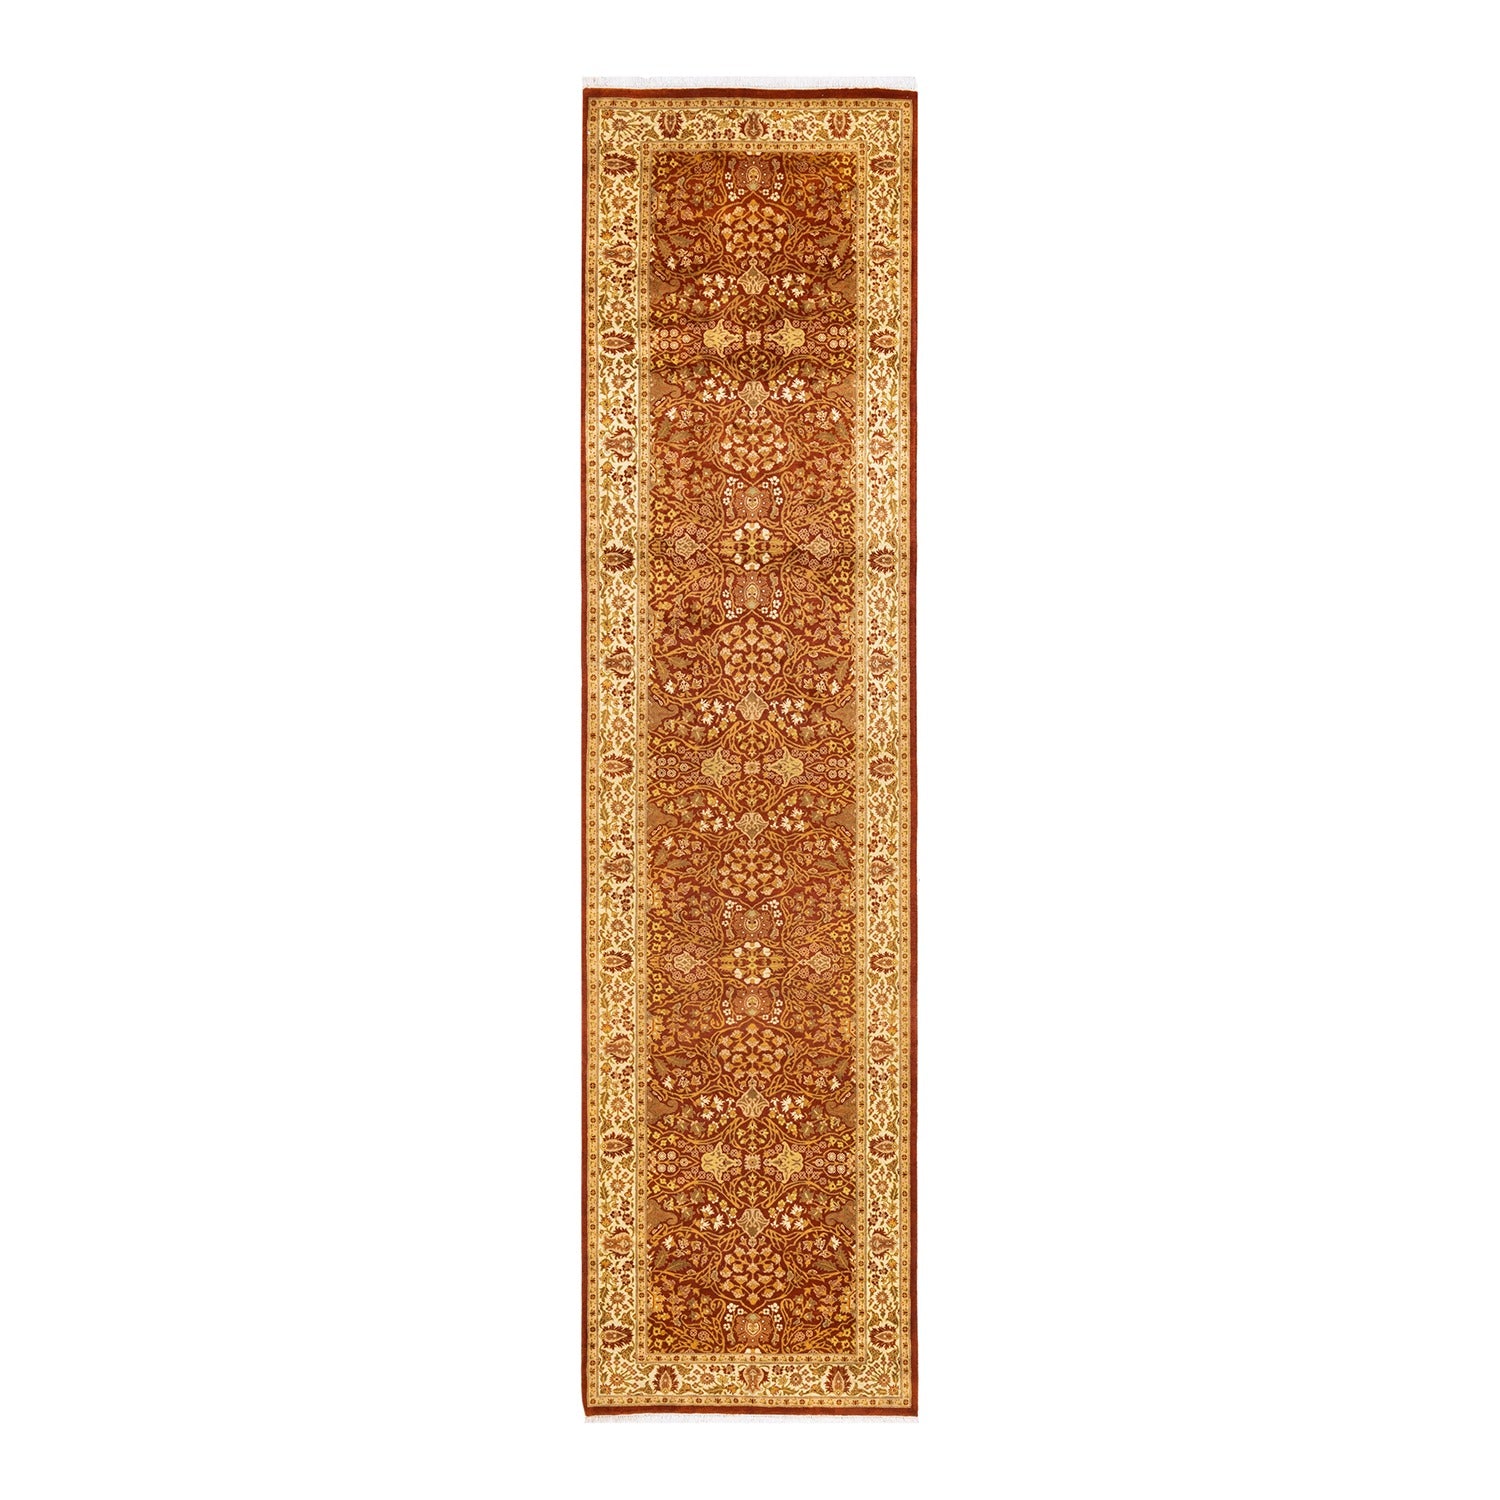 Exquisite Persian-style runner carpet with intricate floral motifs in rich red.